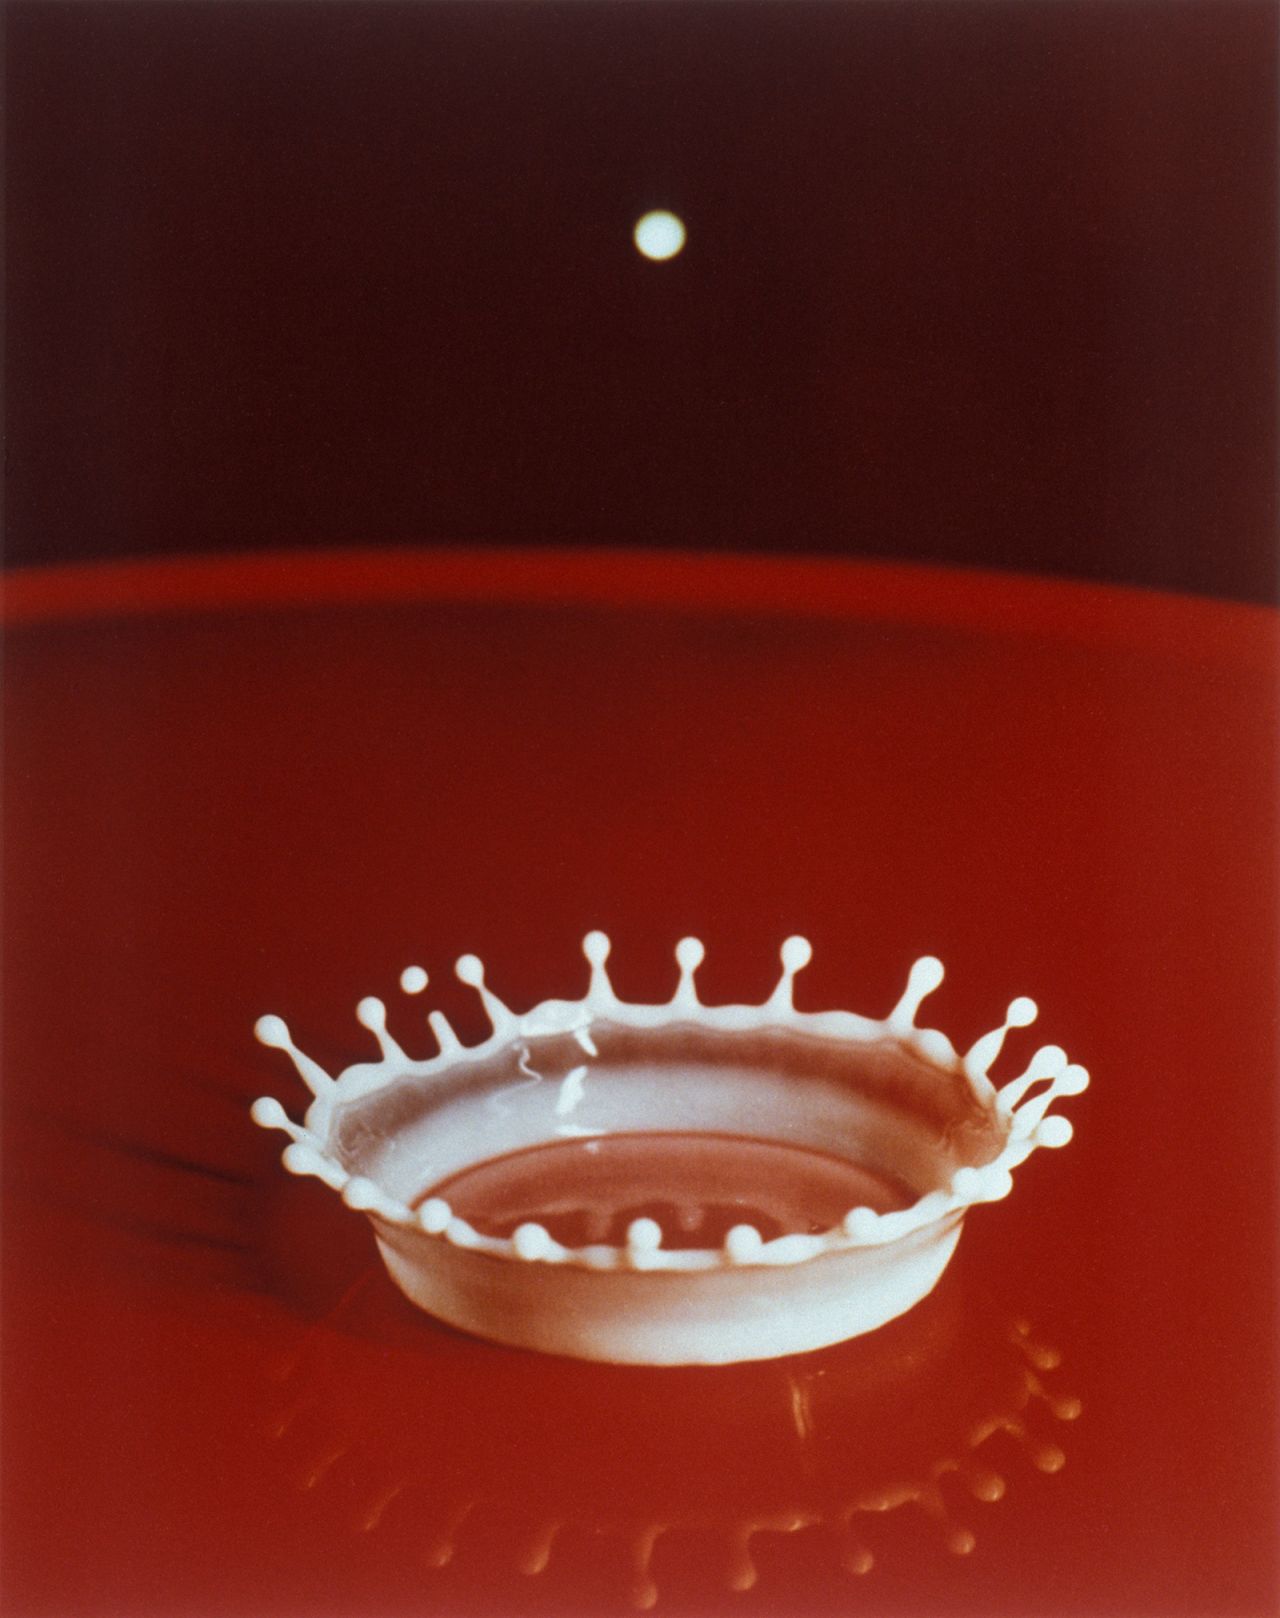 Another of Edgerton's famous photos, taken in 1957, shows the crown-like splash produced by milk droplets.